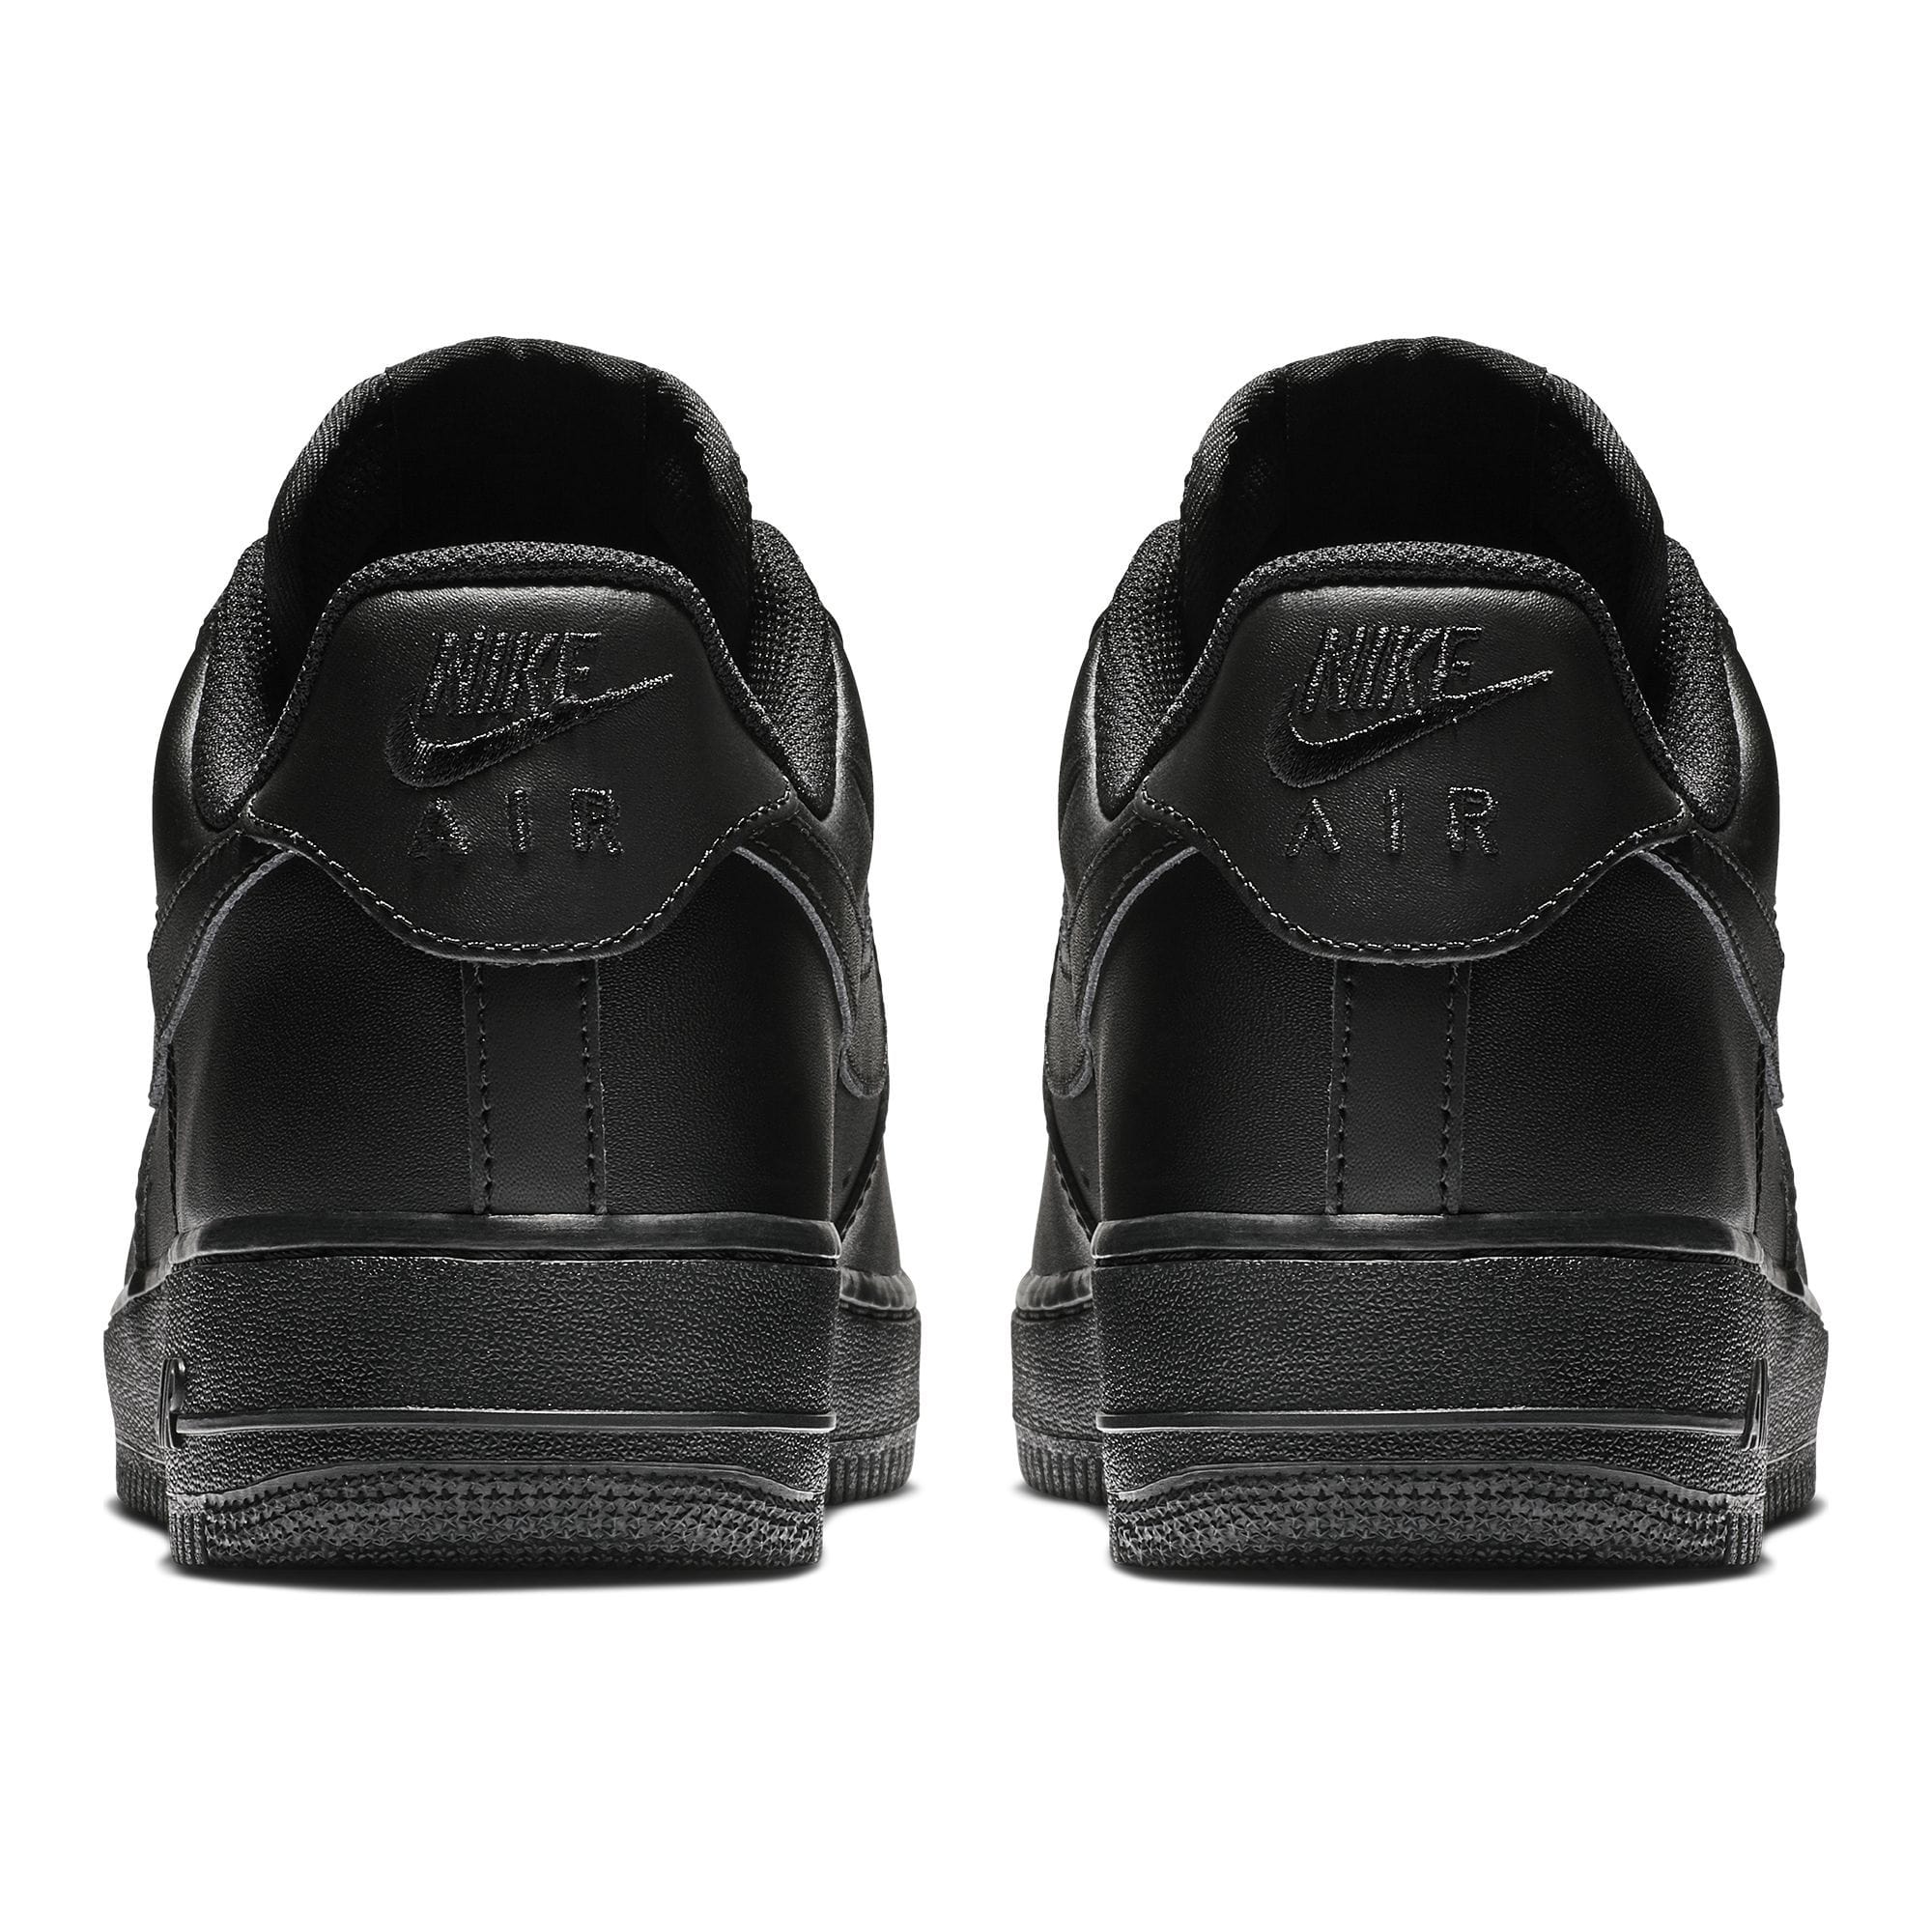 Air Force 1 '07 product image